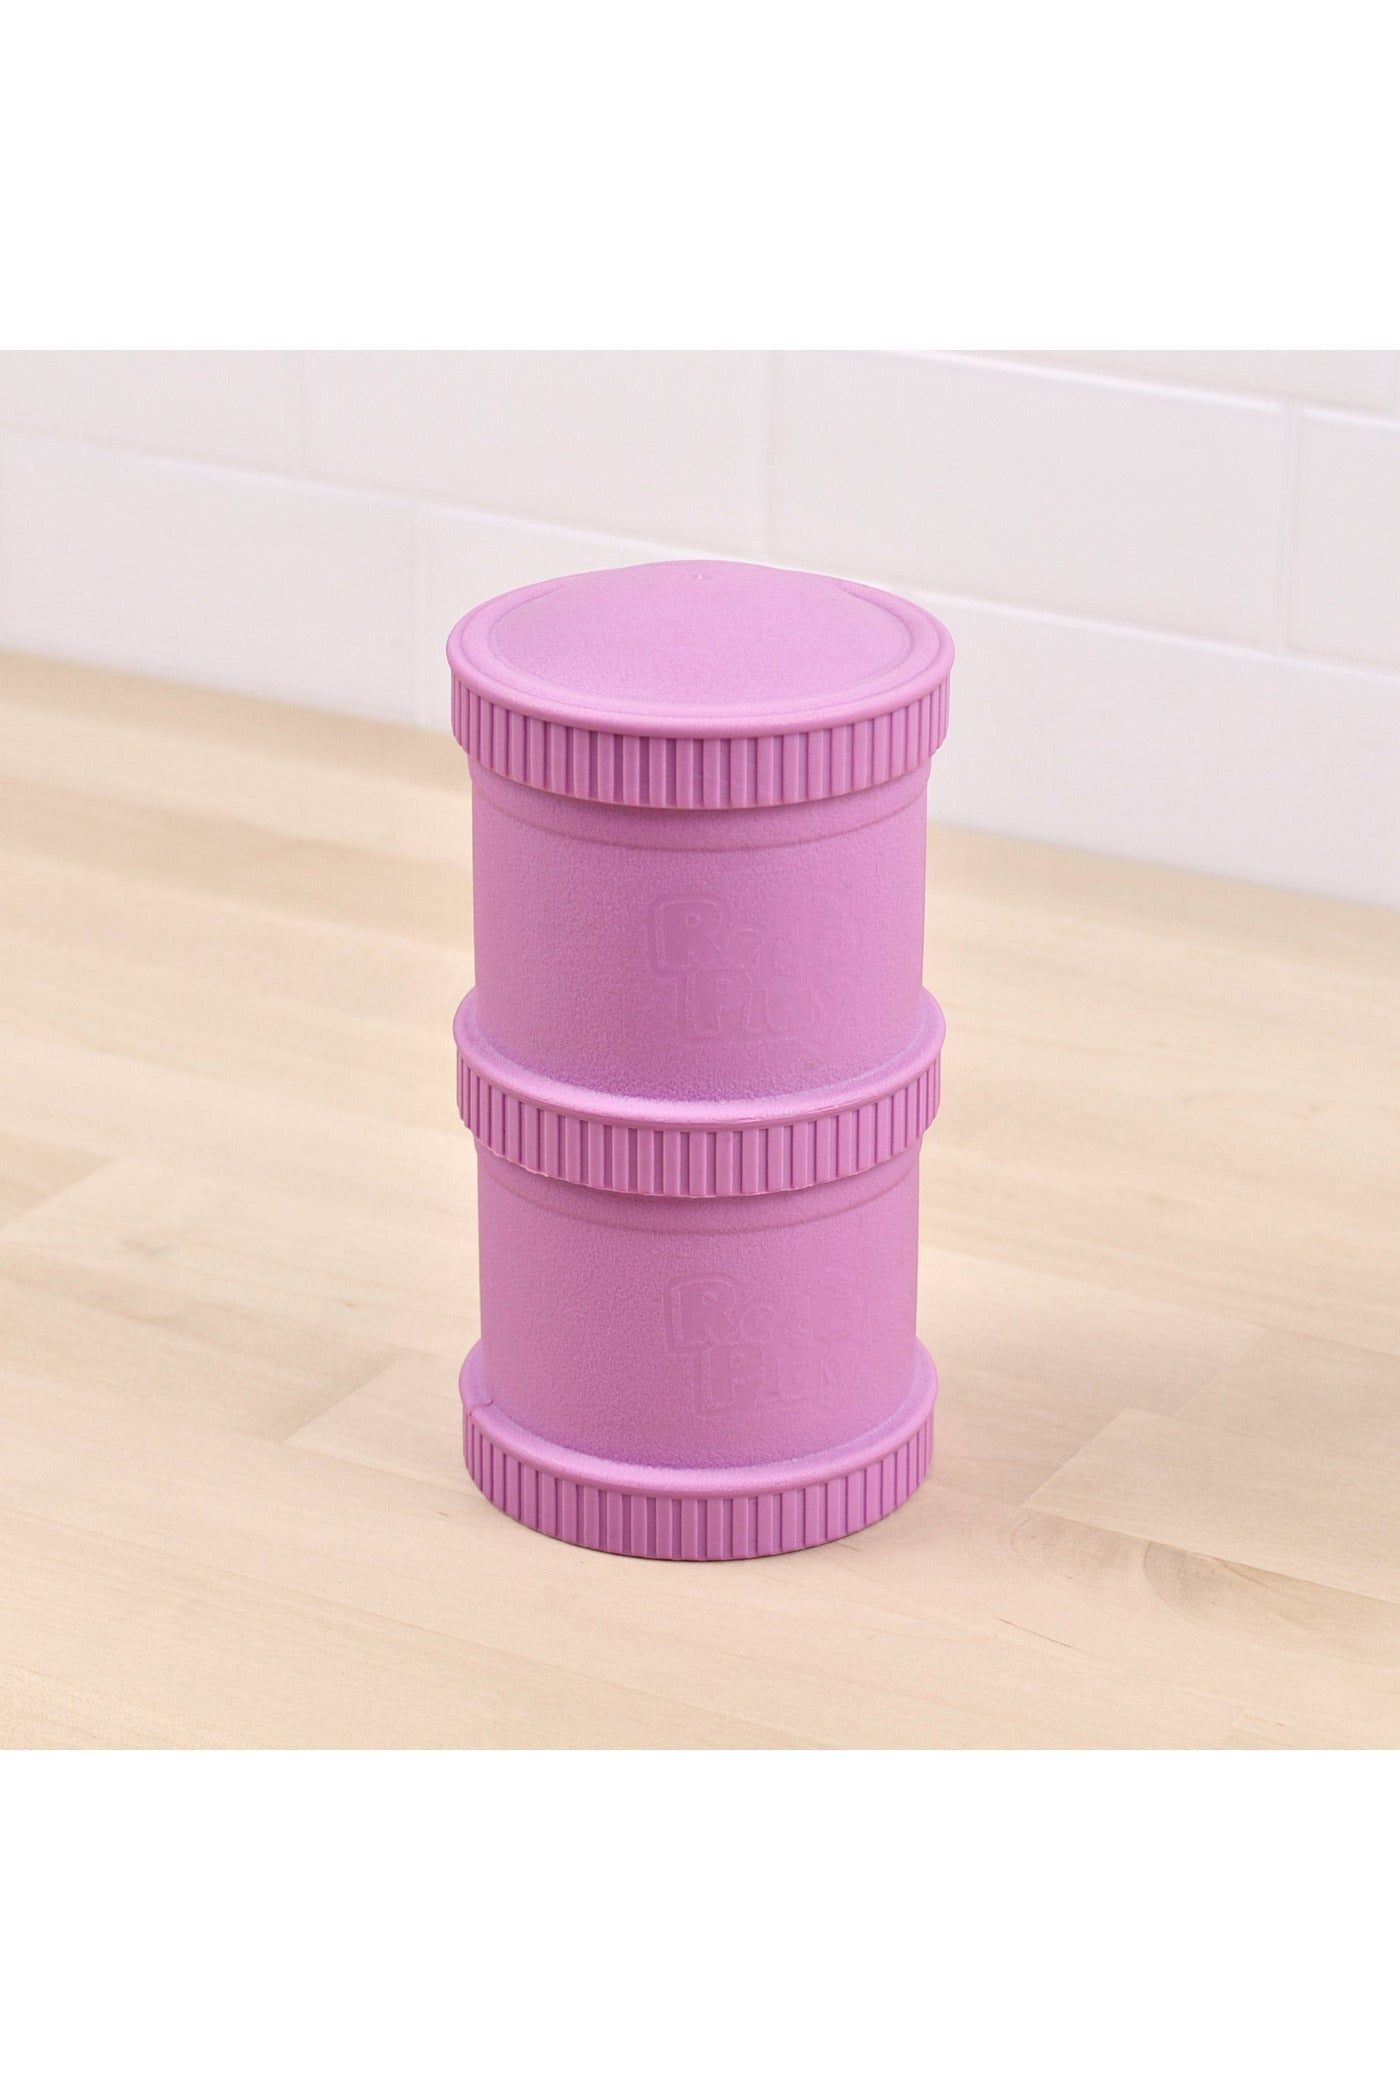 Re-Play Snack Stack (2 Pods and 1 Lid NO Retail Packaging) - Purple